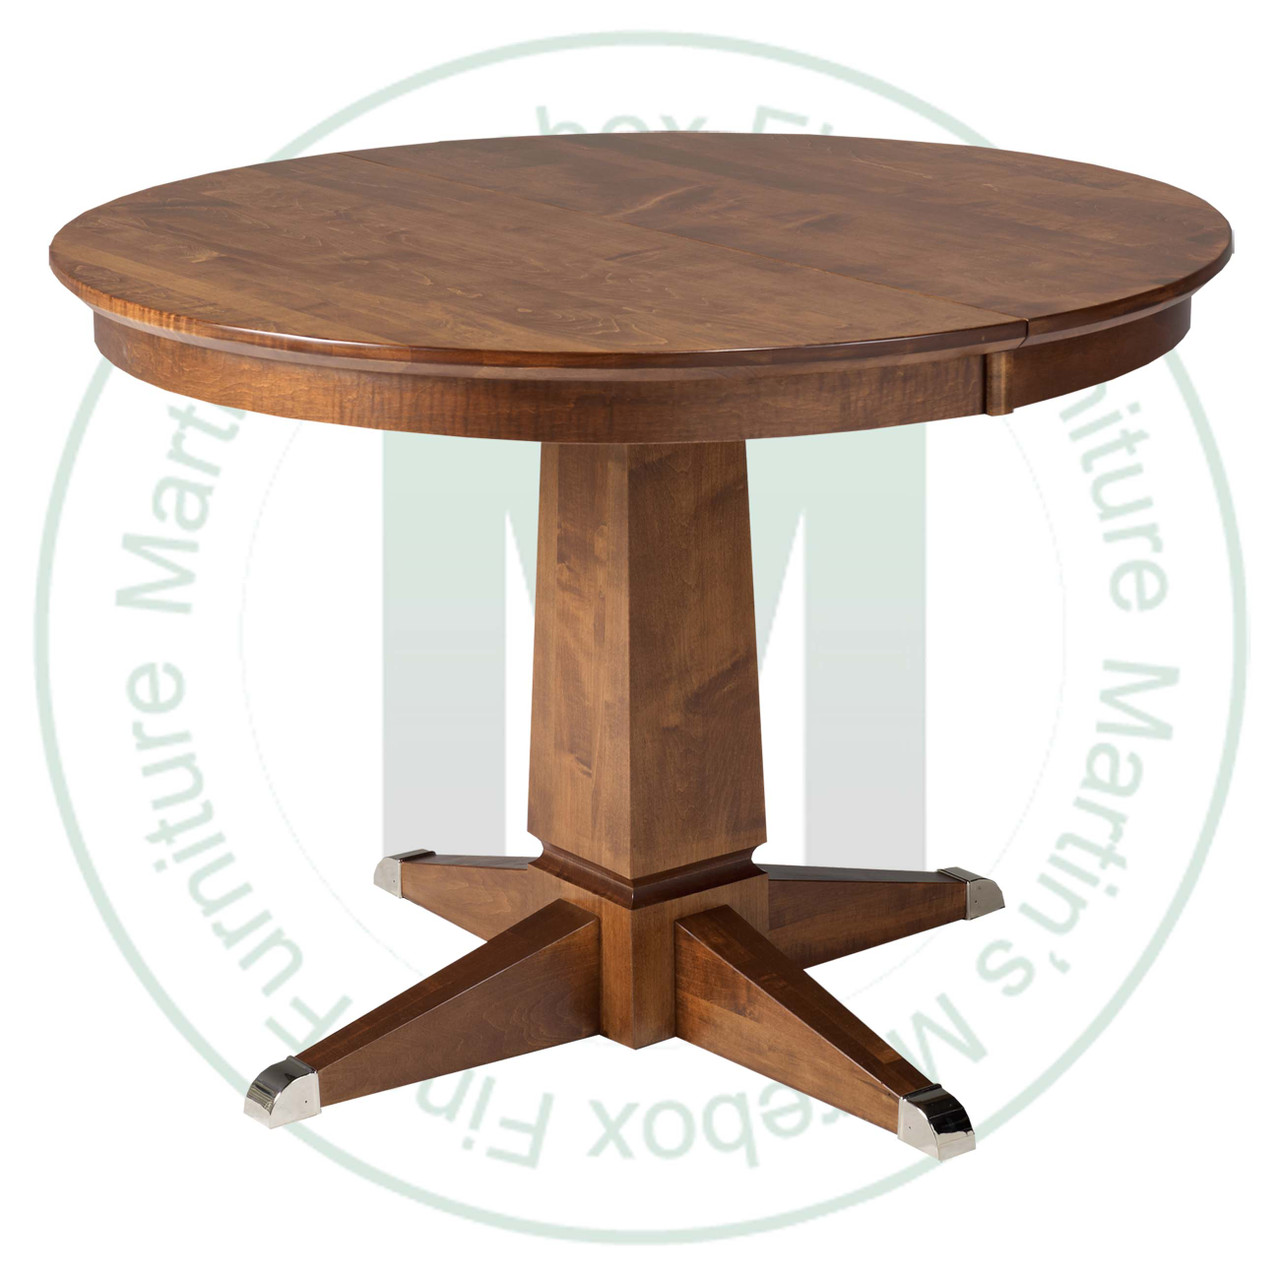 Maple Danish Single Pedestal Table 36''D x 42''W x 30''H Round Solid Top Table